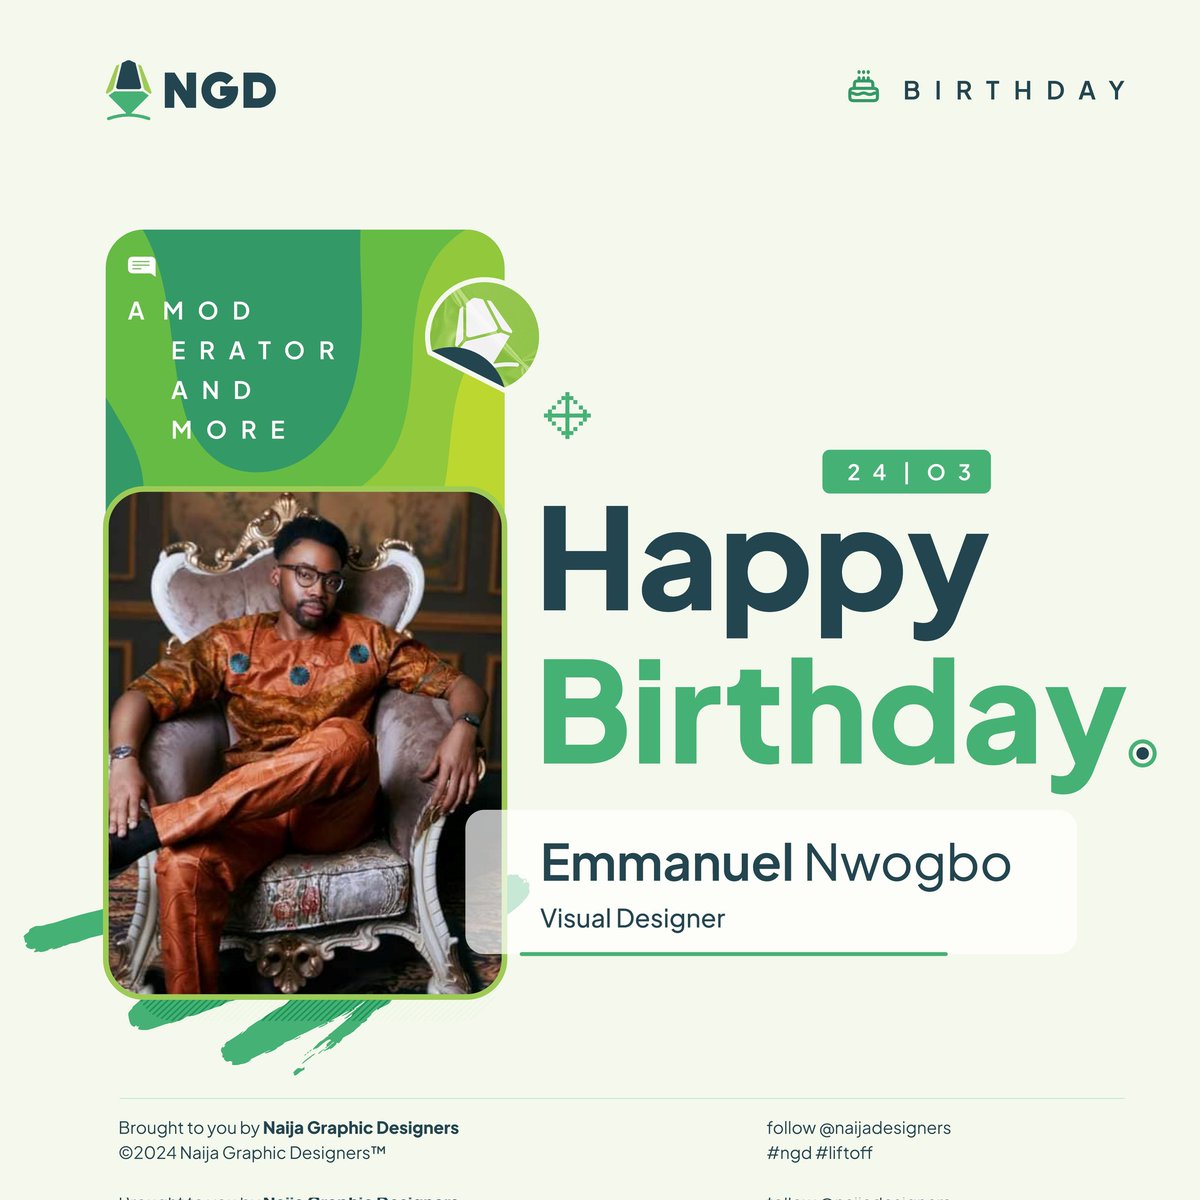 Your expertise and passion for good design are undeniable. Your critiques spark conversation and inspire growth in the entire design community. 

Here's to another year of design excellence! 
Happy birthday @365jbcharacters

#NGD #NGD2024 #HappyBirthday #designgrowth